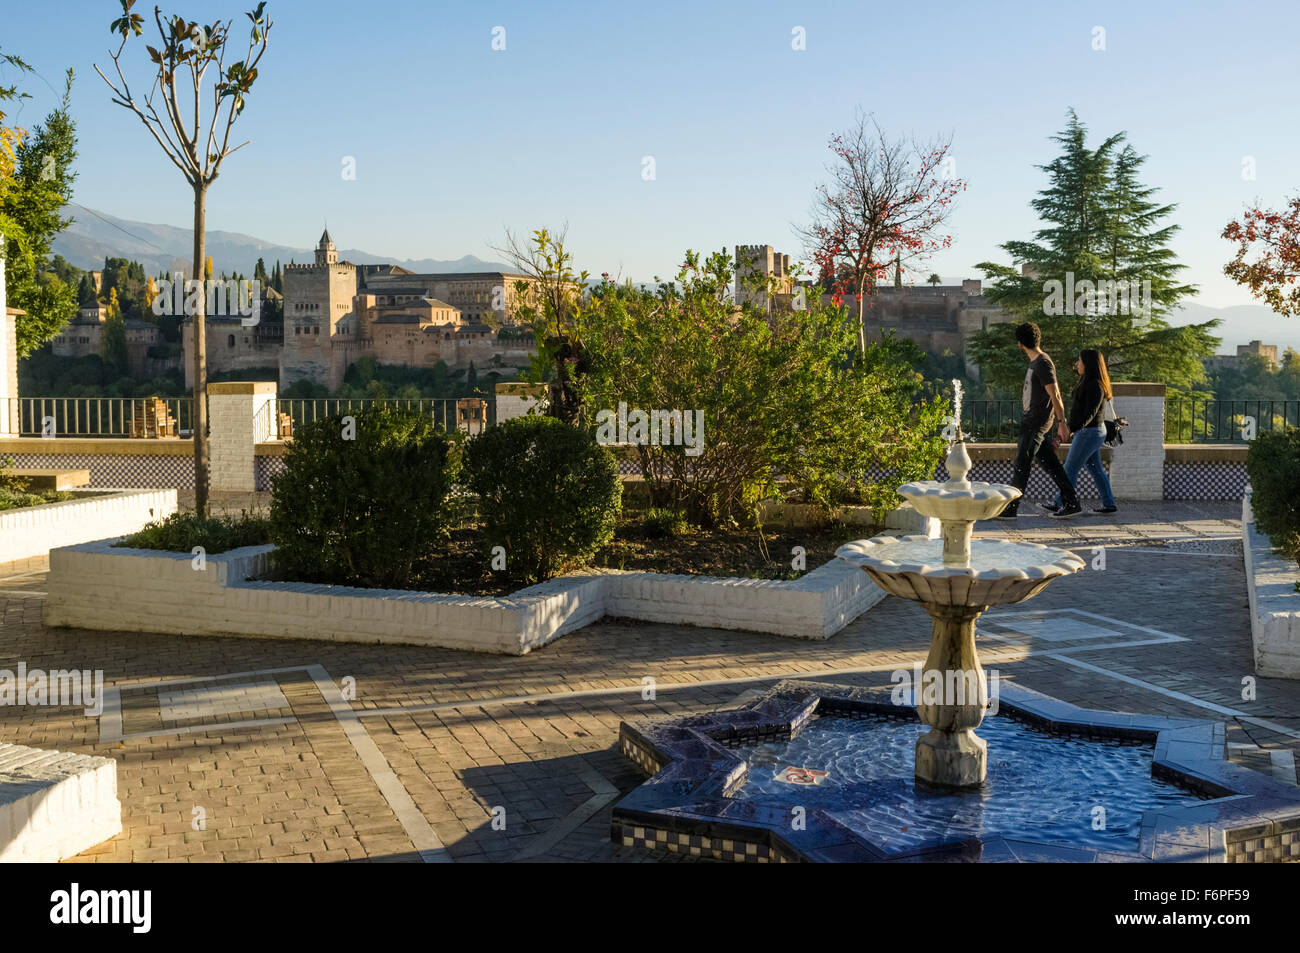 Gardens of the Albaicin quarter mosque with Alhambra palace in background. Granada, Spain Stock Photo